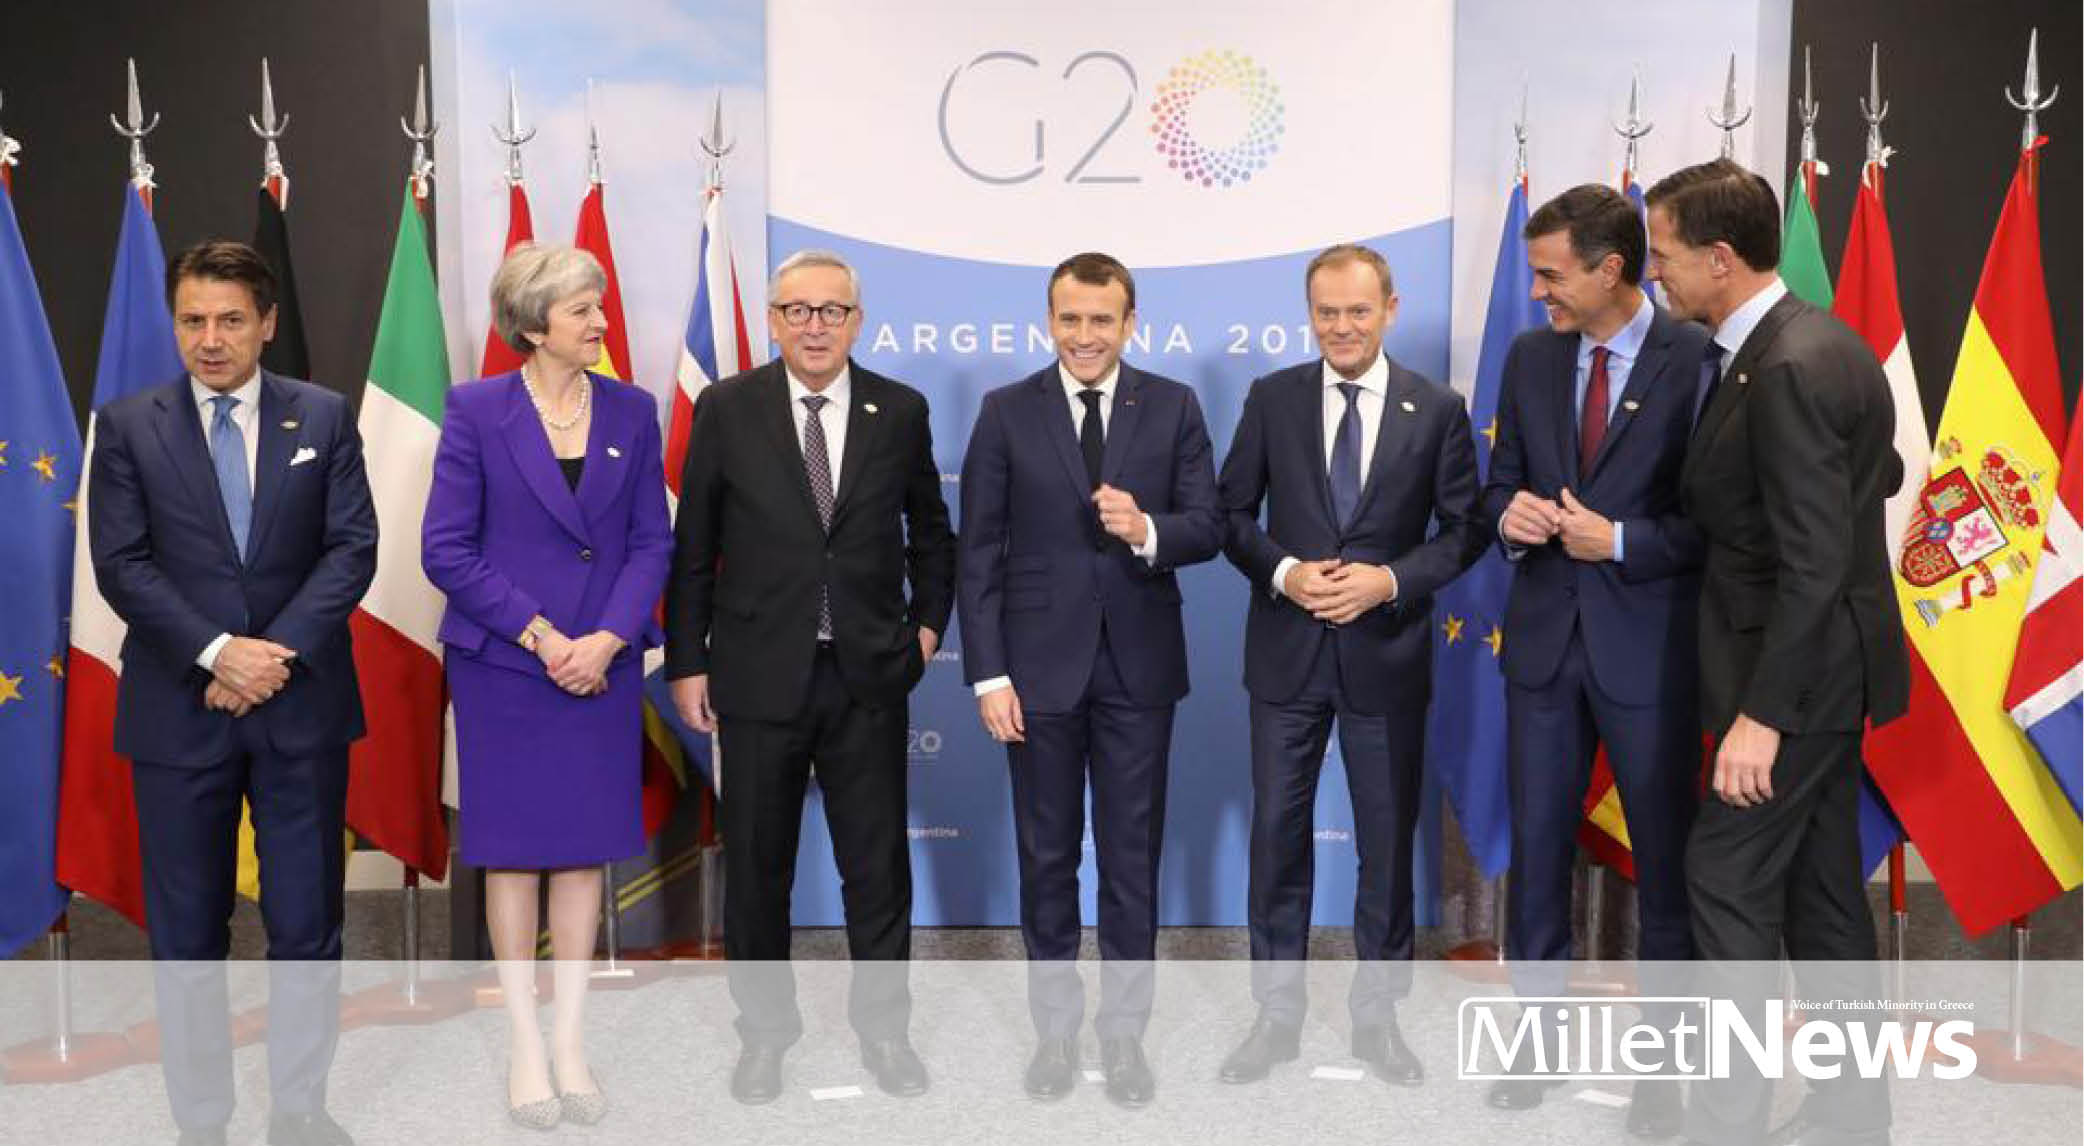 As G20 summit opens, contentious issues loom on sidelines